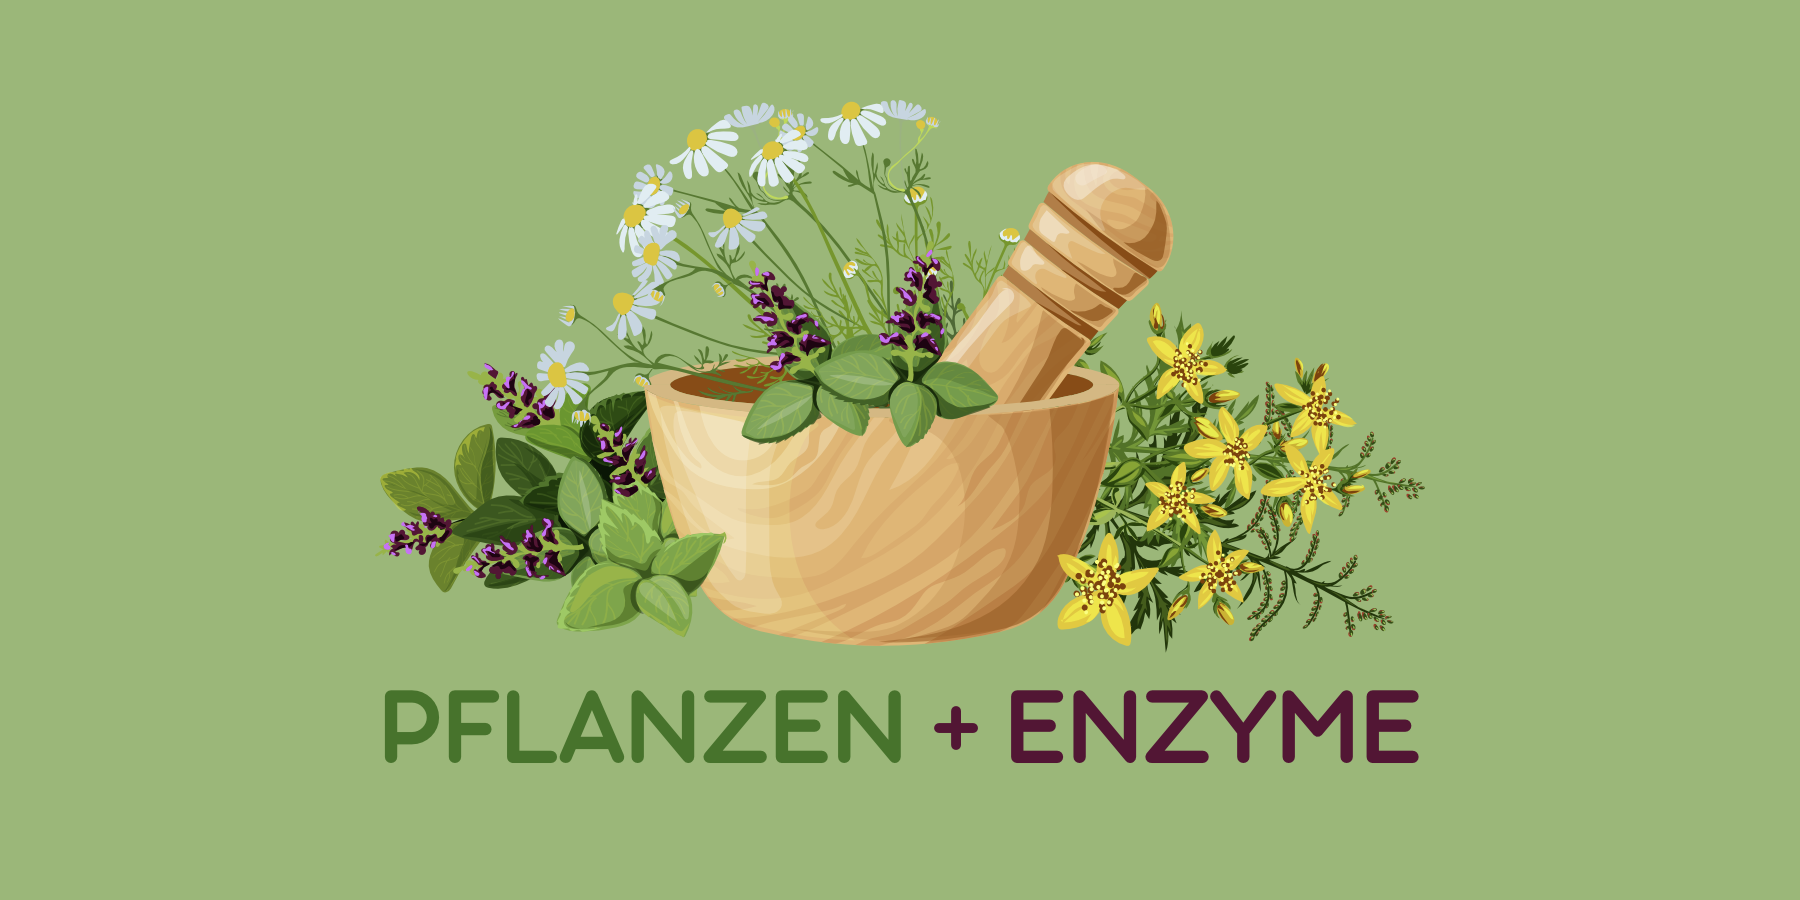 Plants + Enzymes